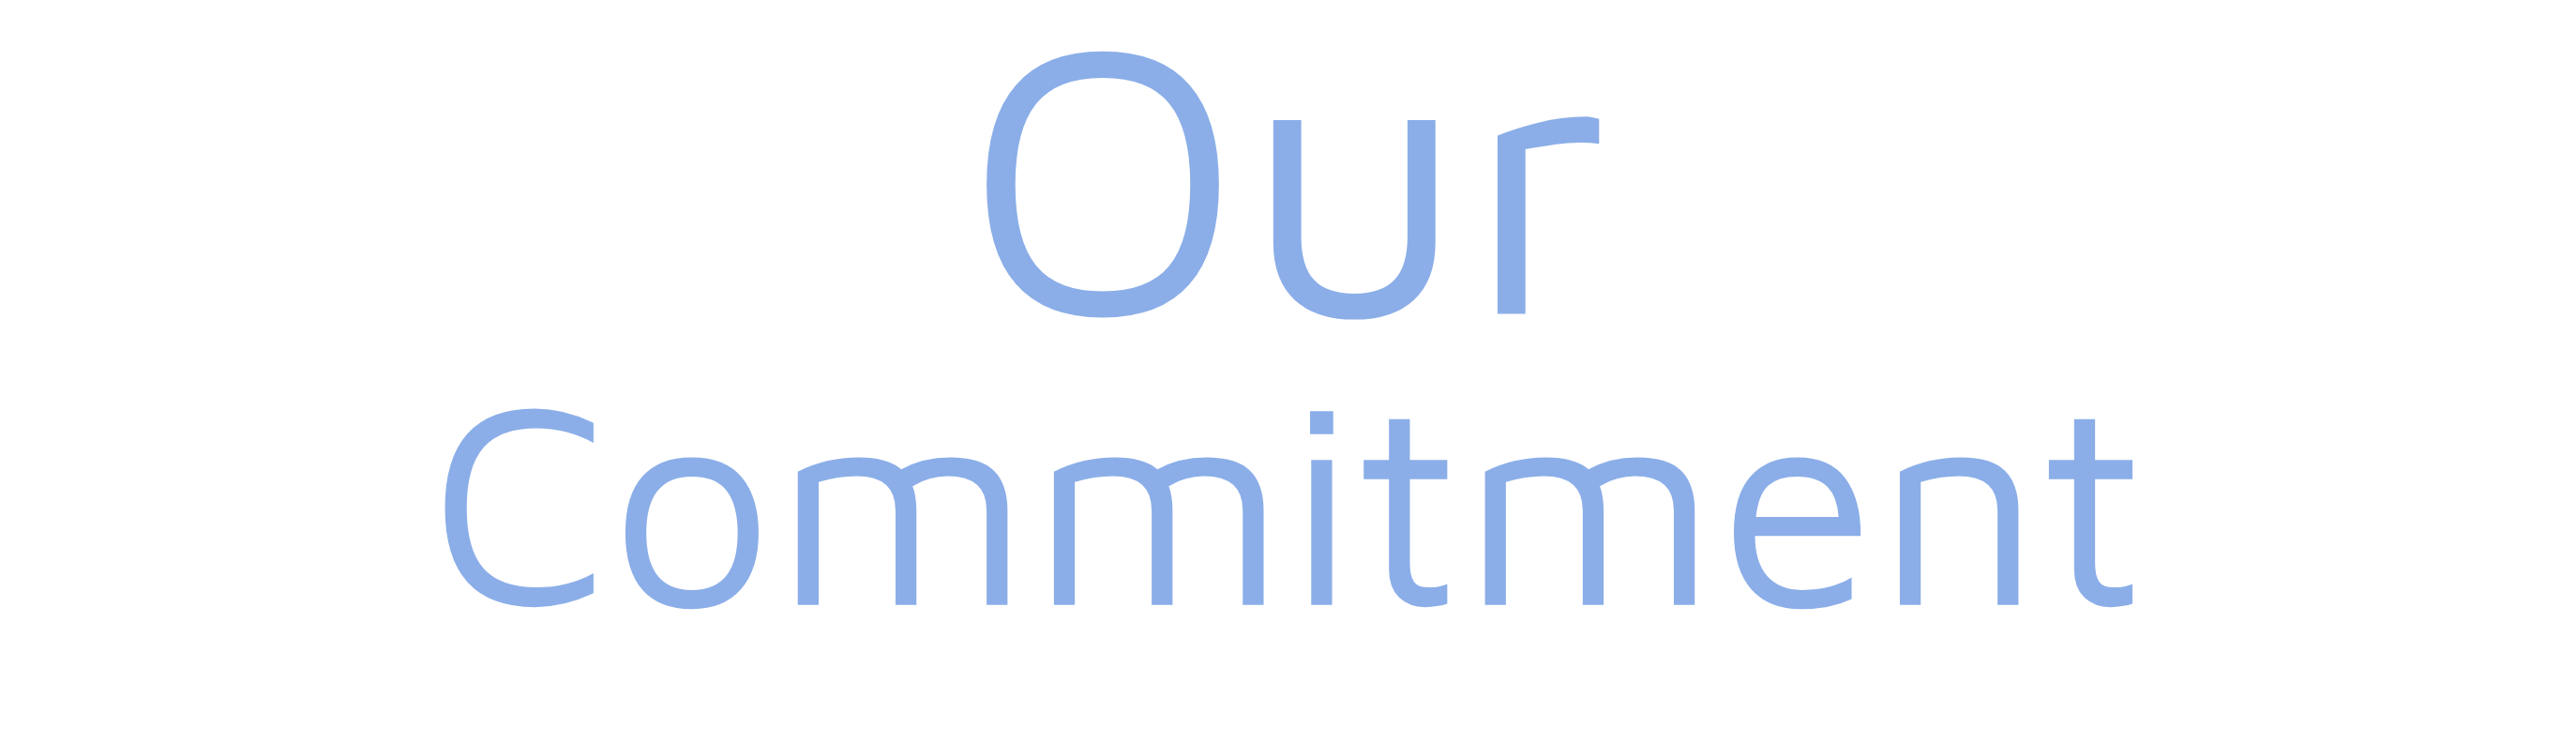 Our commitments